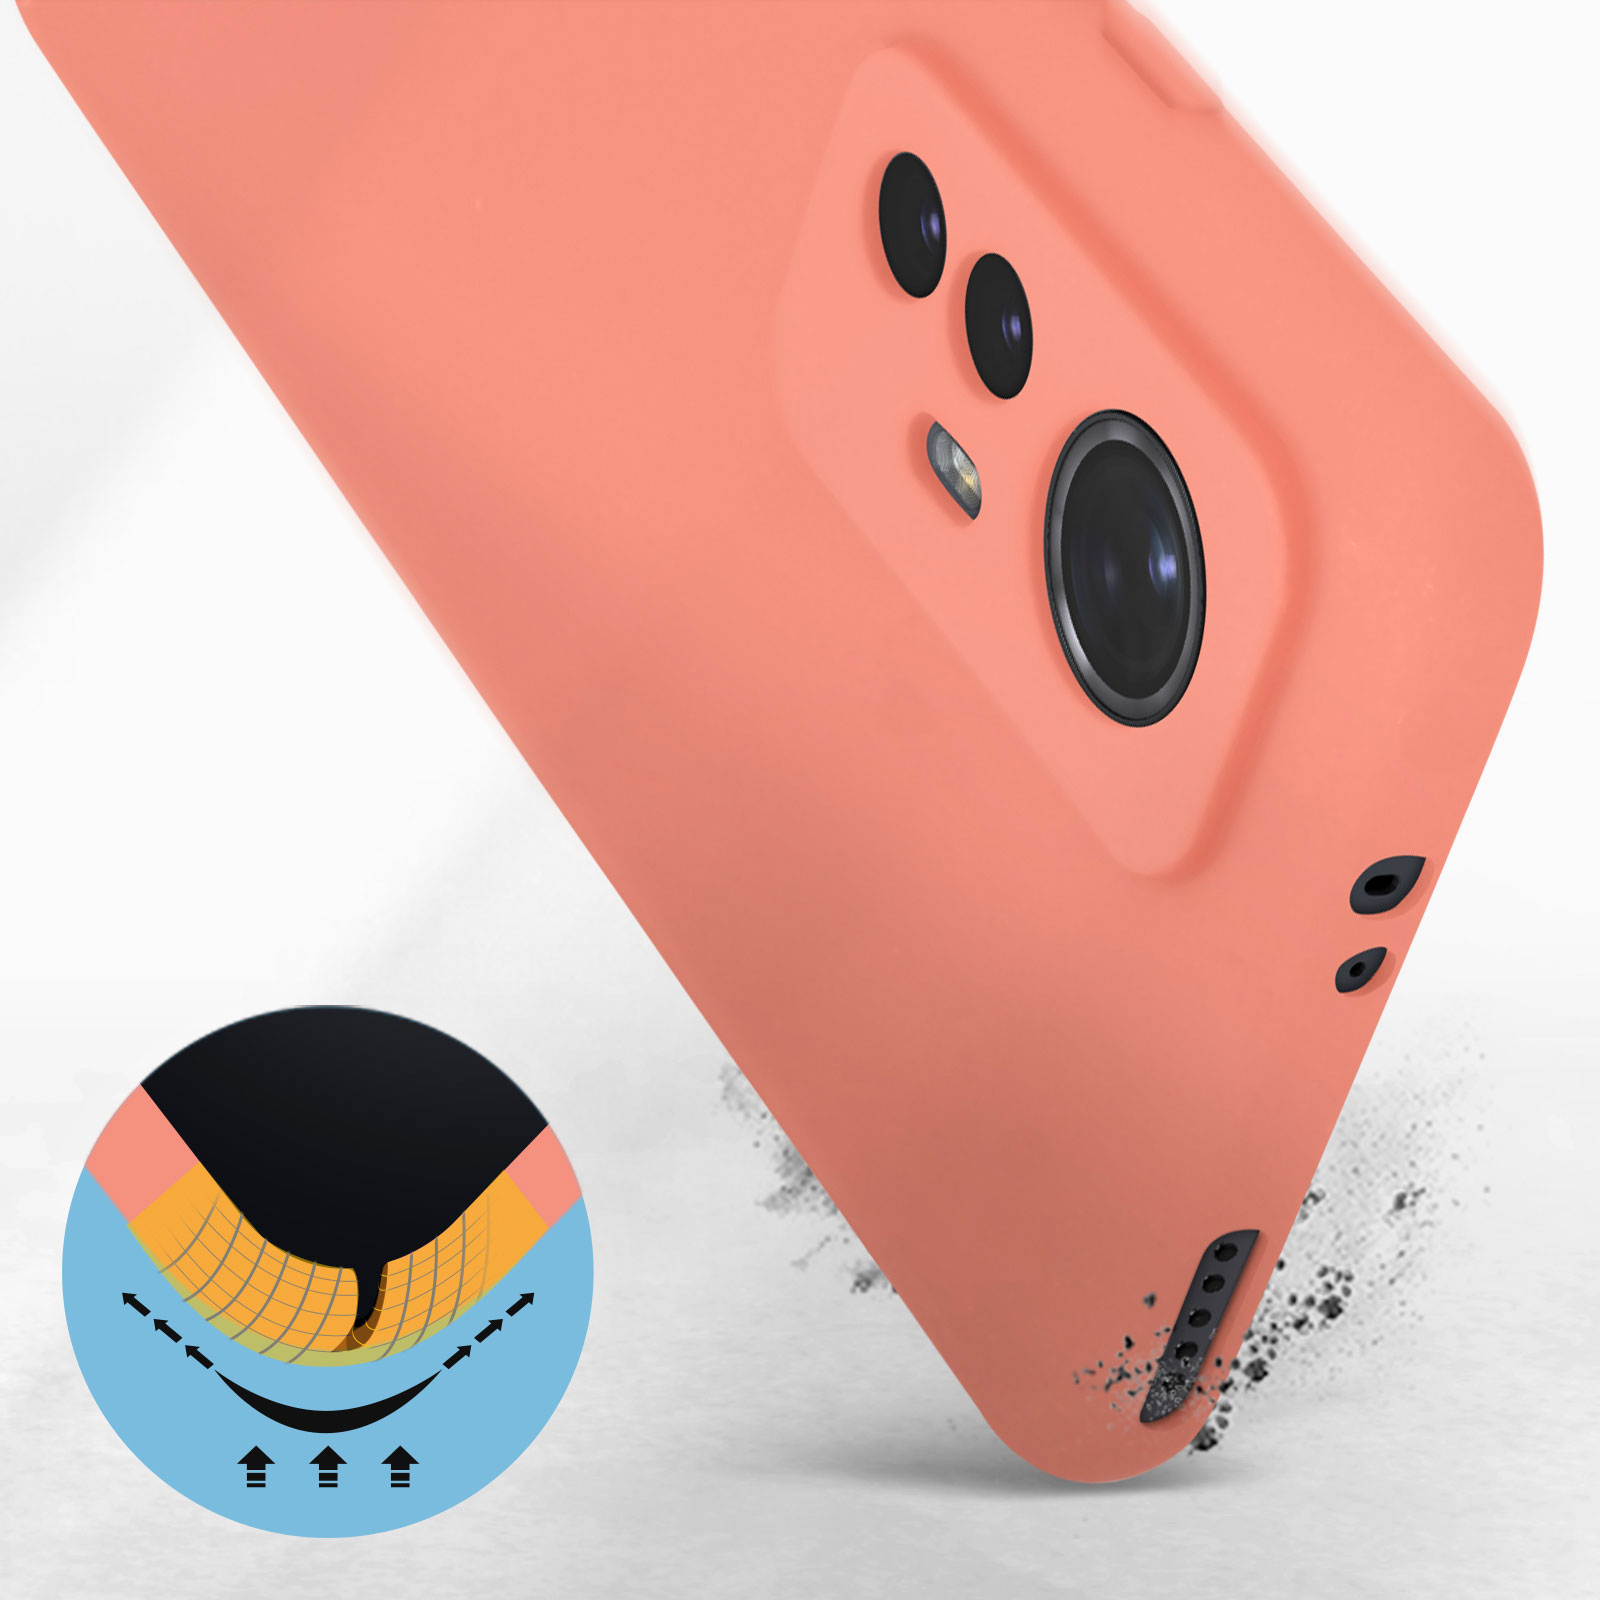 Backcover, Rosa 12T Pro, Xiaomi, Soft Series, Touch AVIZAR